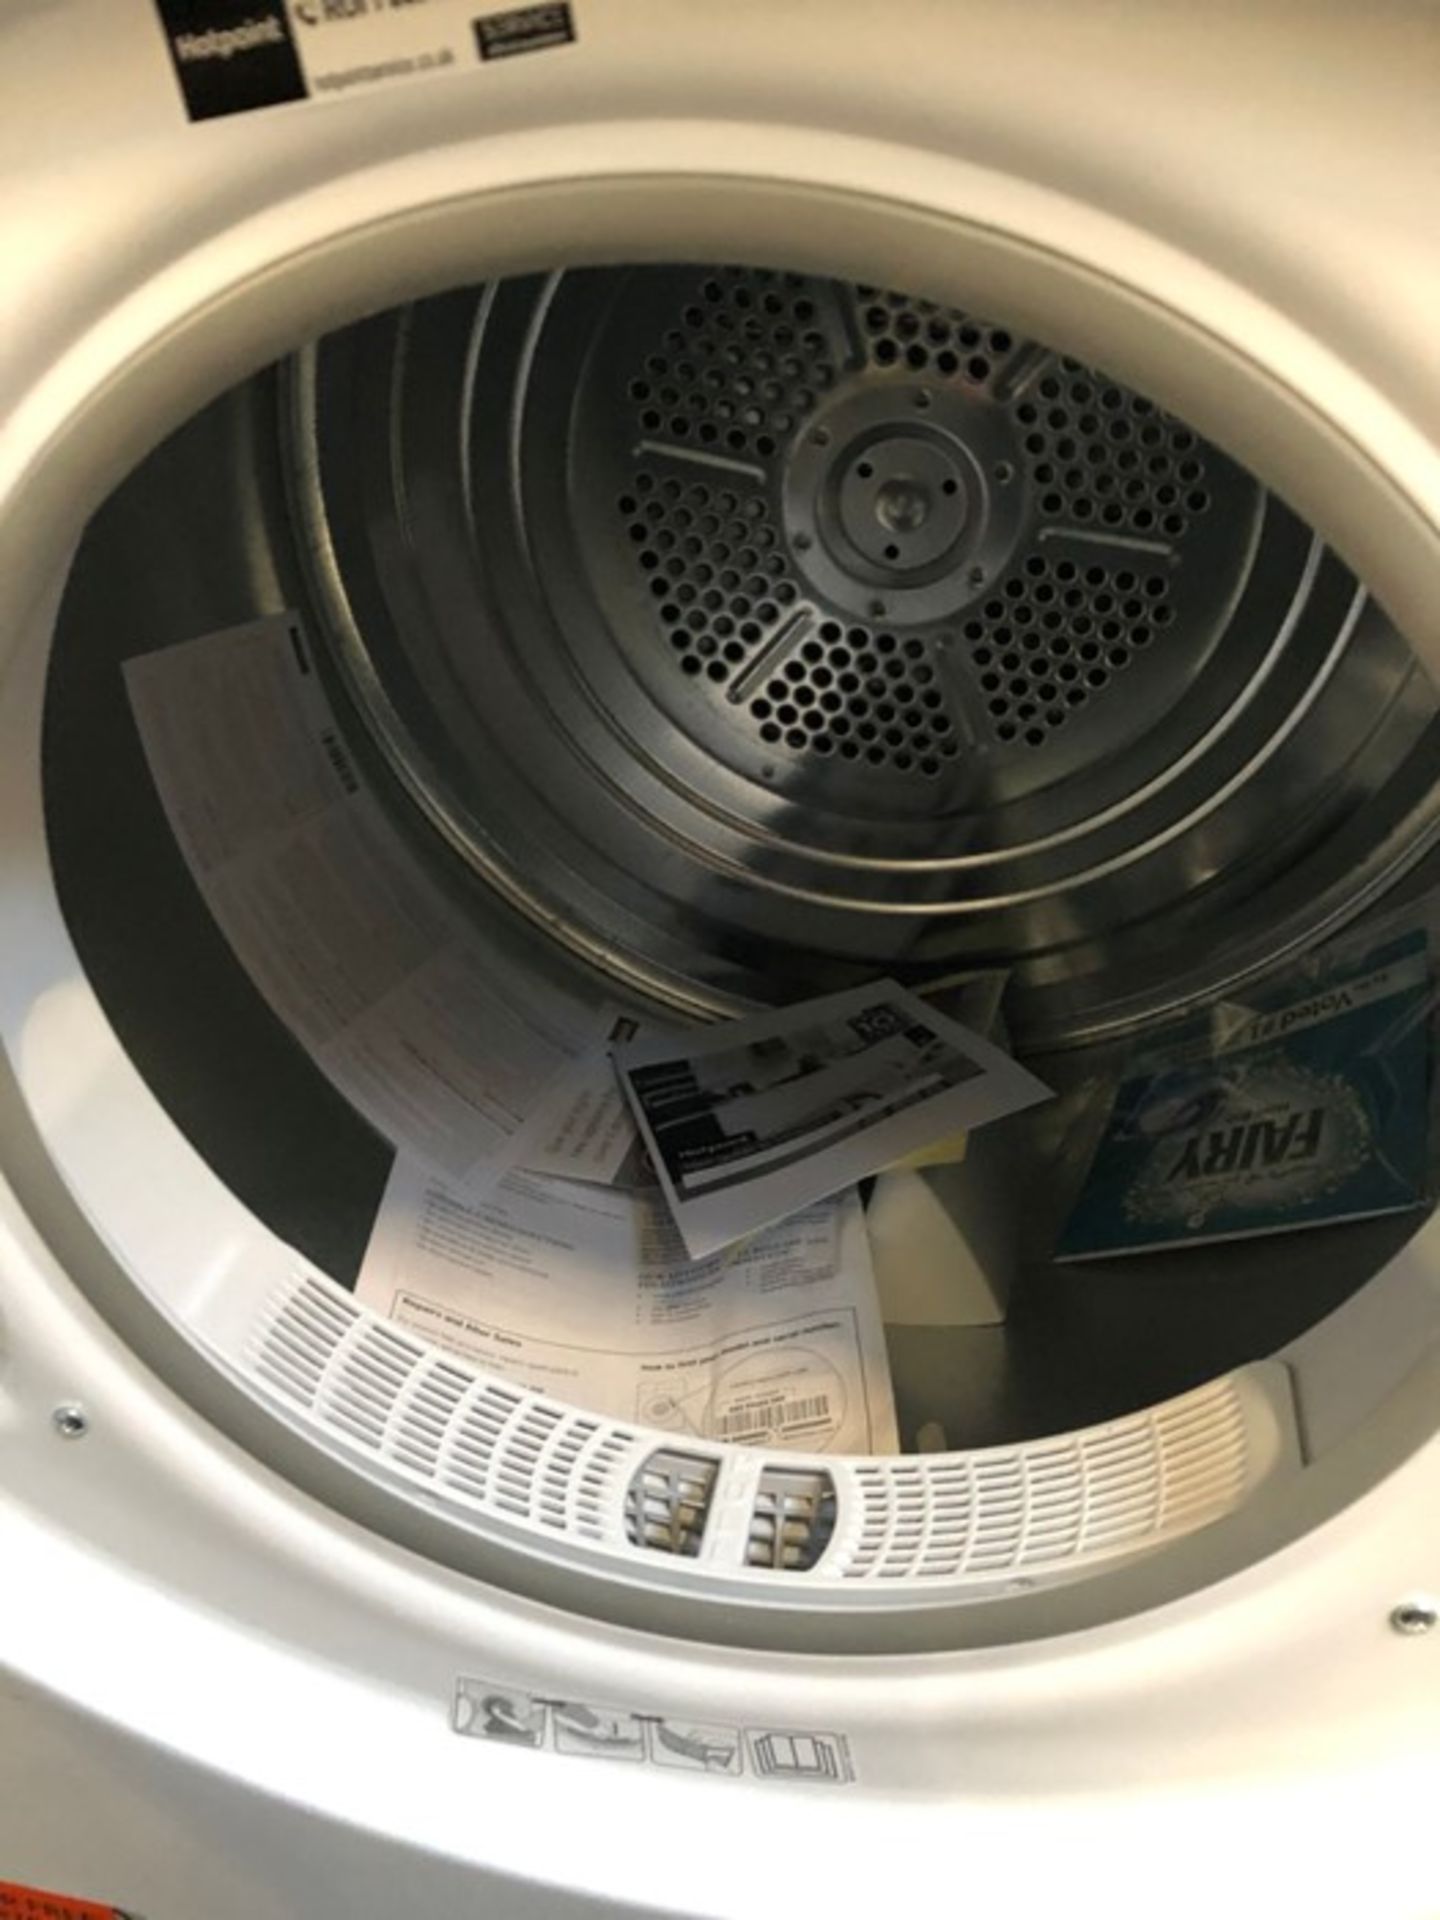 HOTPOINT VENTED TUMBLE DRYER - FETV60CP / RRP £209.99 / UNTESTED, UNUSED. COSMETIC DAMAGE, ONE - Image 2 of 5